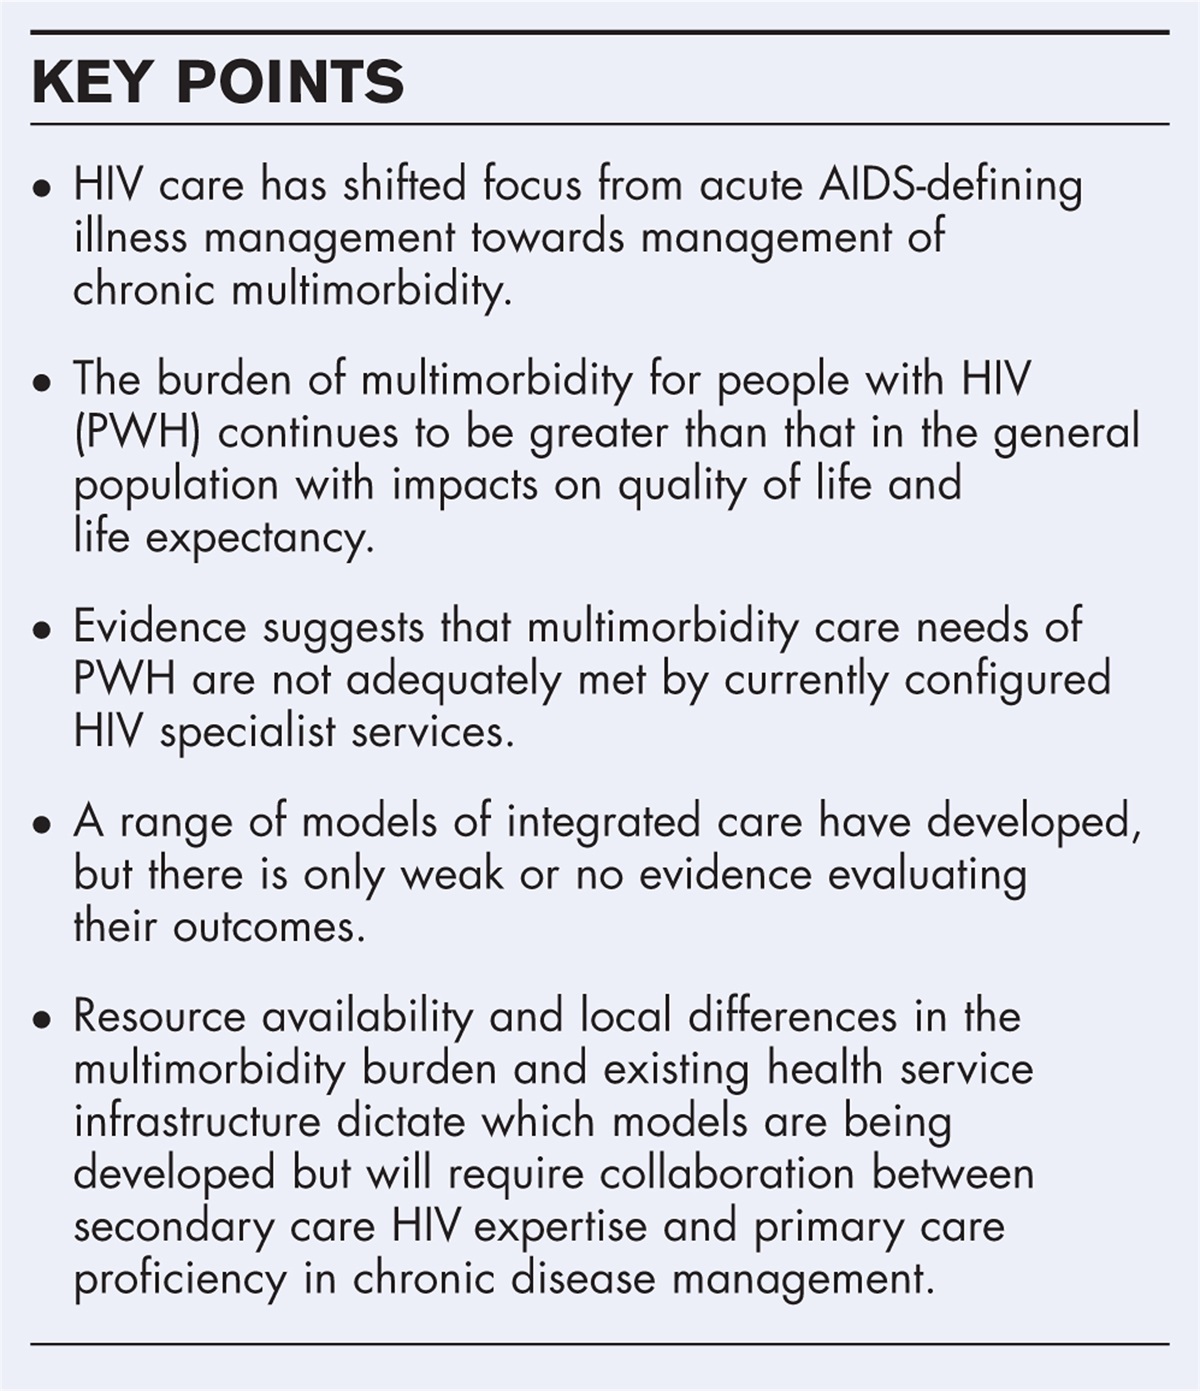 A new era of HIV care for age-associated multimorbidity